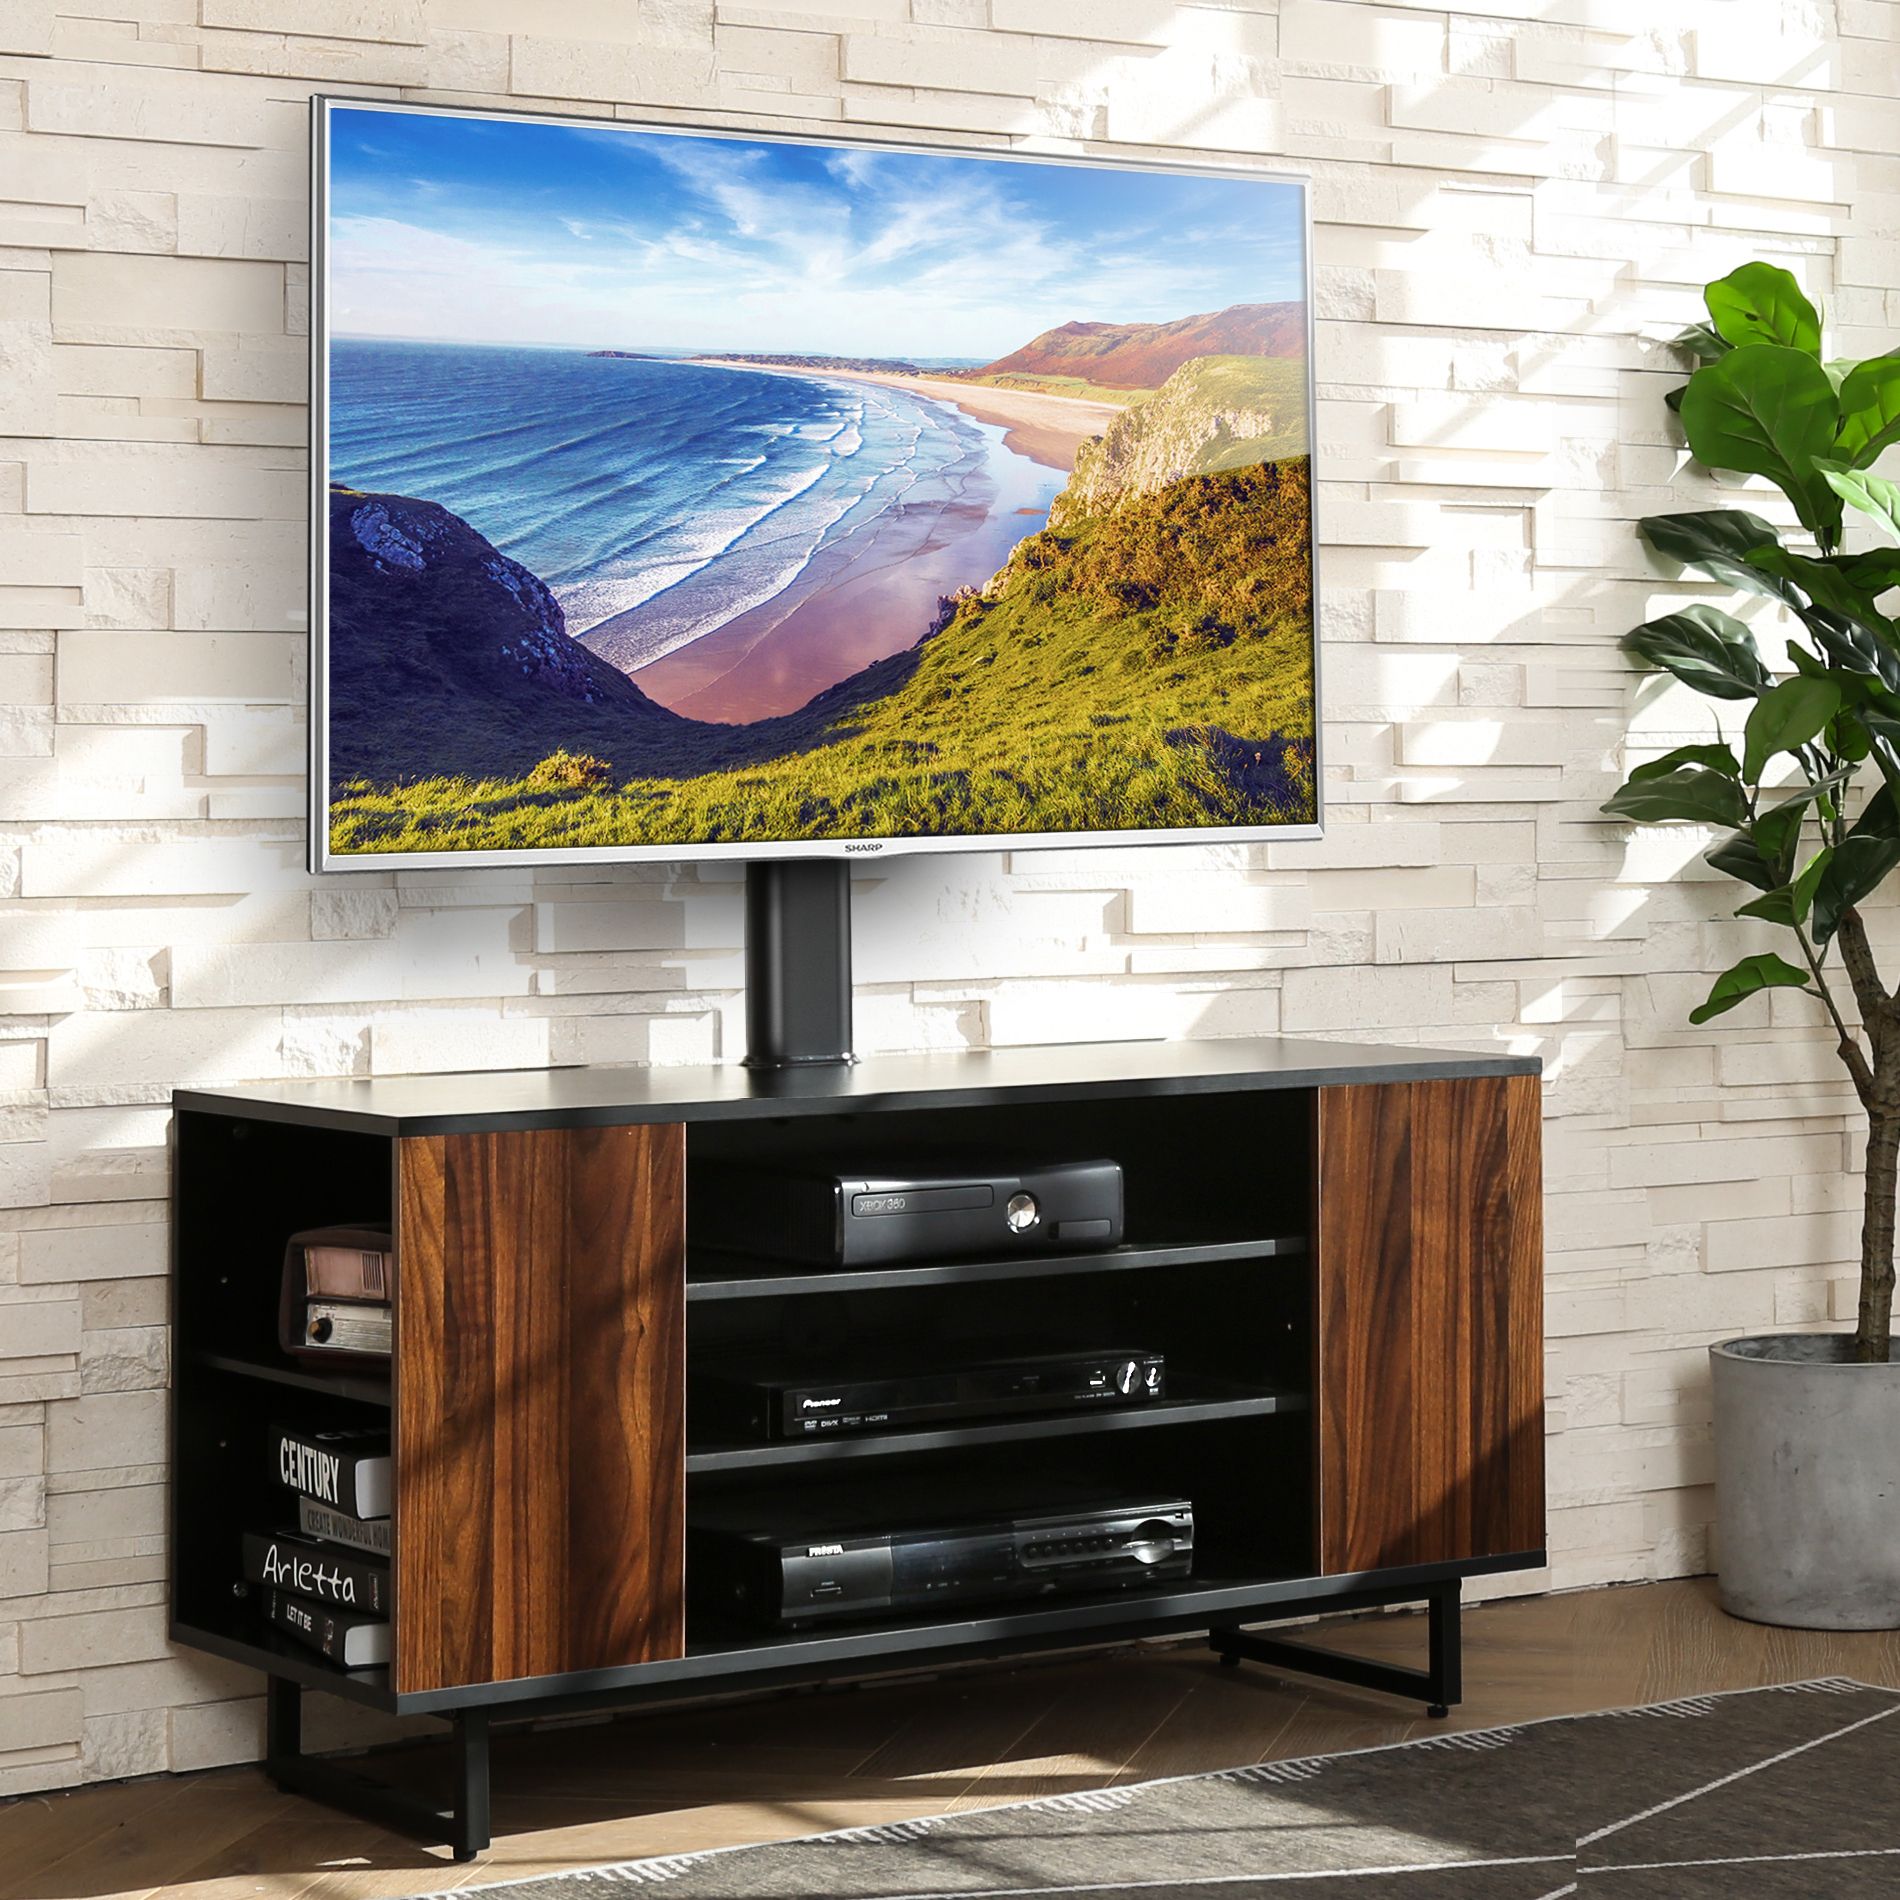 Fitueyes 3 Tiers Floor Wood Tv Stand Media Console With In Wood And Glass Tv Stands For Flat Screens (View 11 of 15)